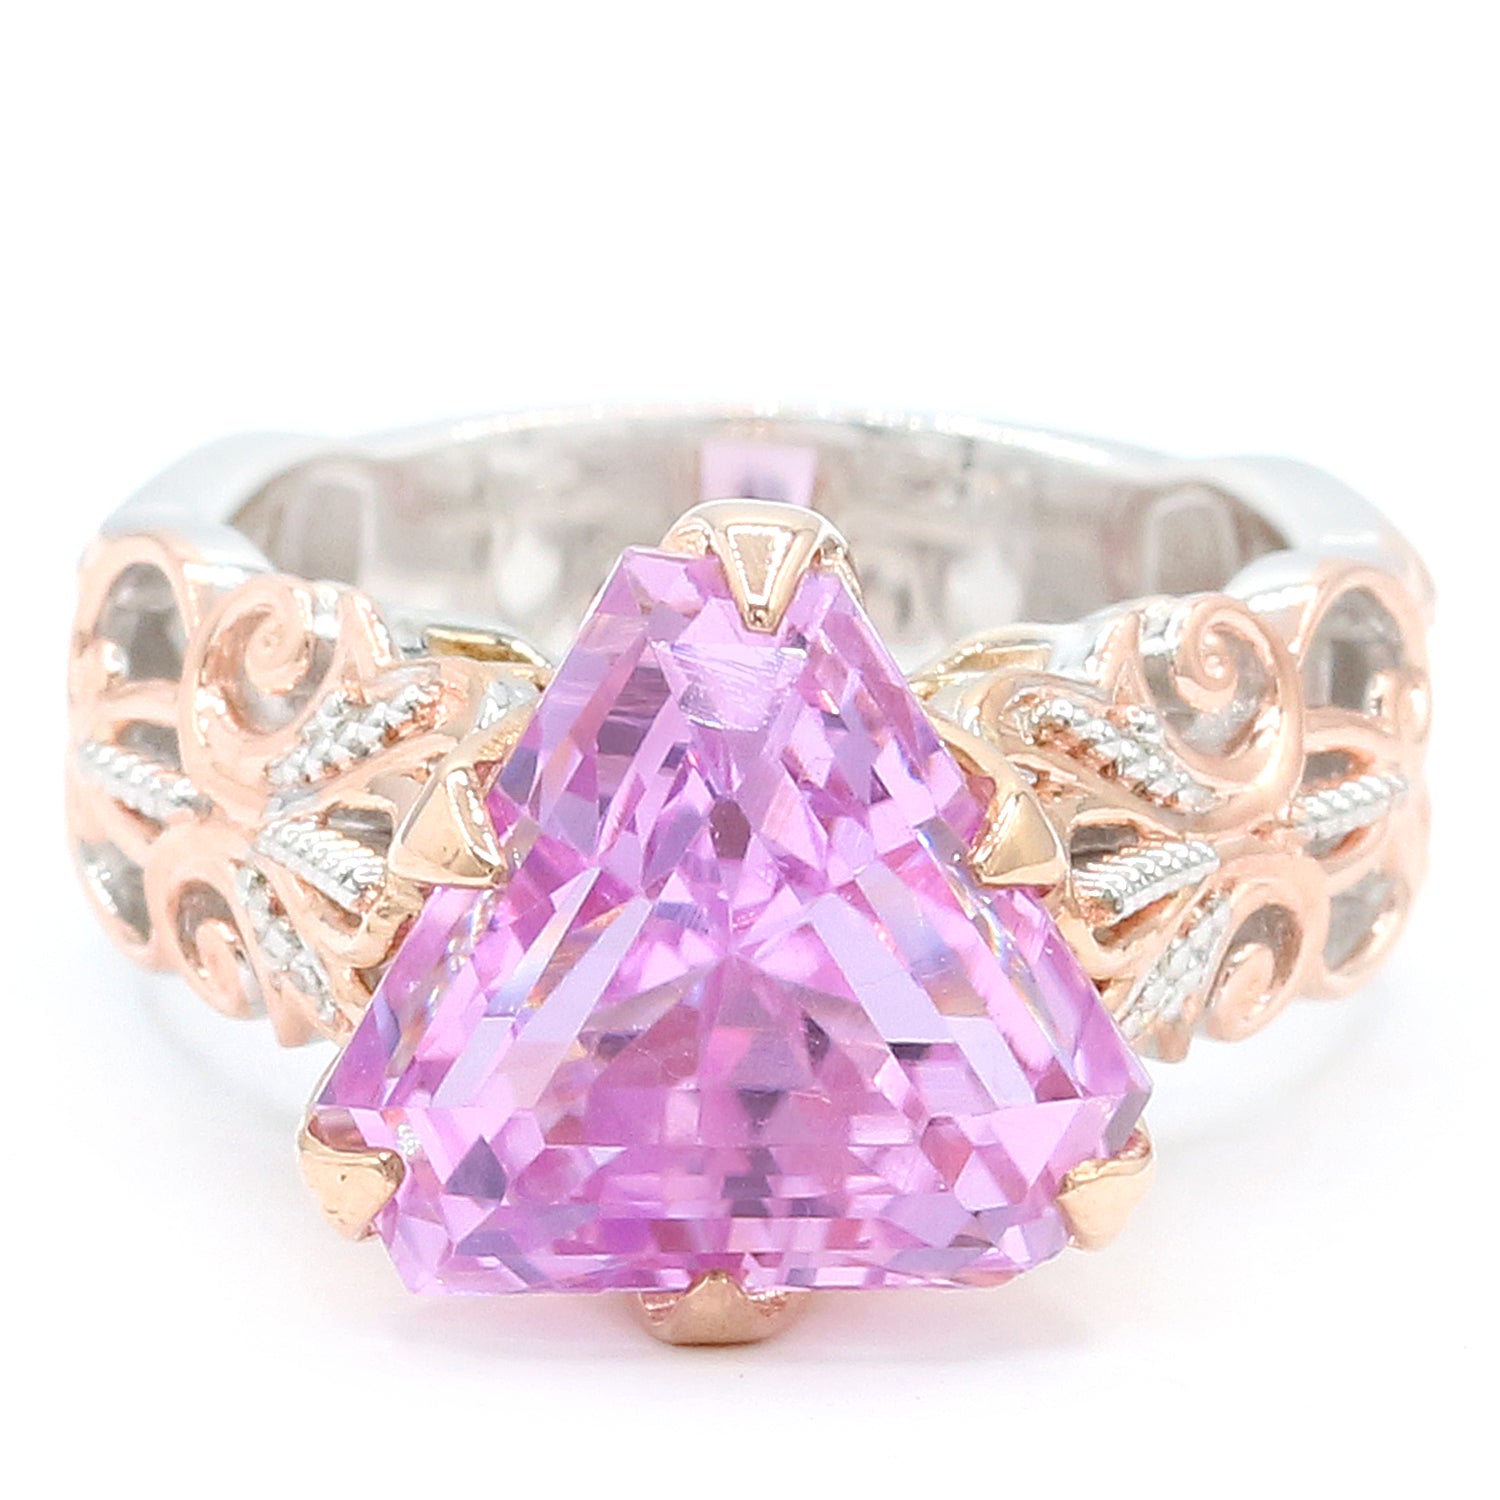 Limited Edition Gems en Vogue Luxe One-of-a-Kind 9.76ctw Shield Cut Kunzite Ring